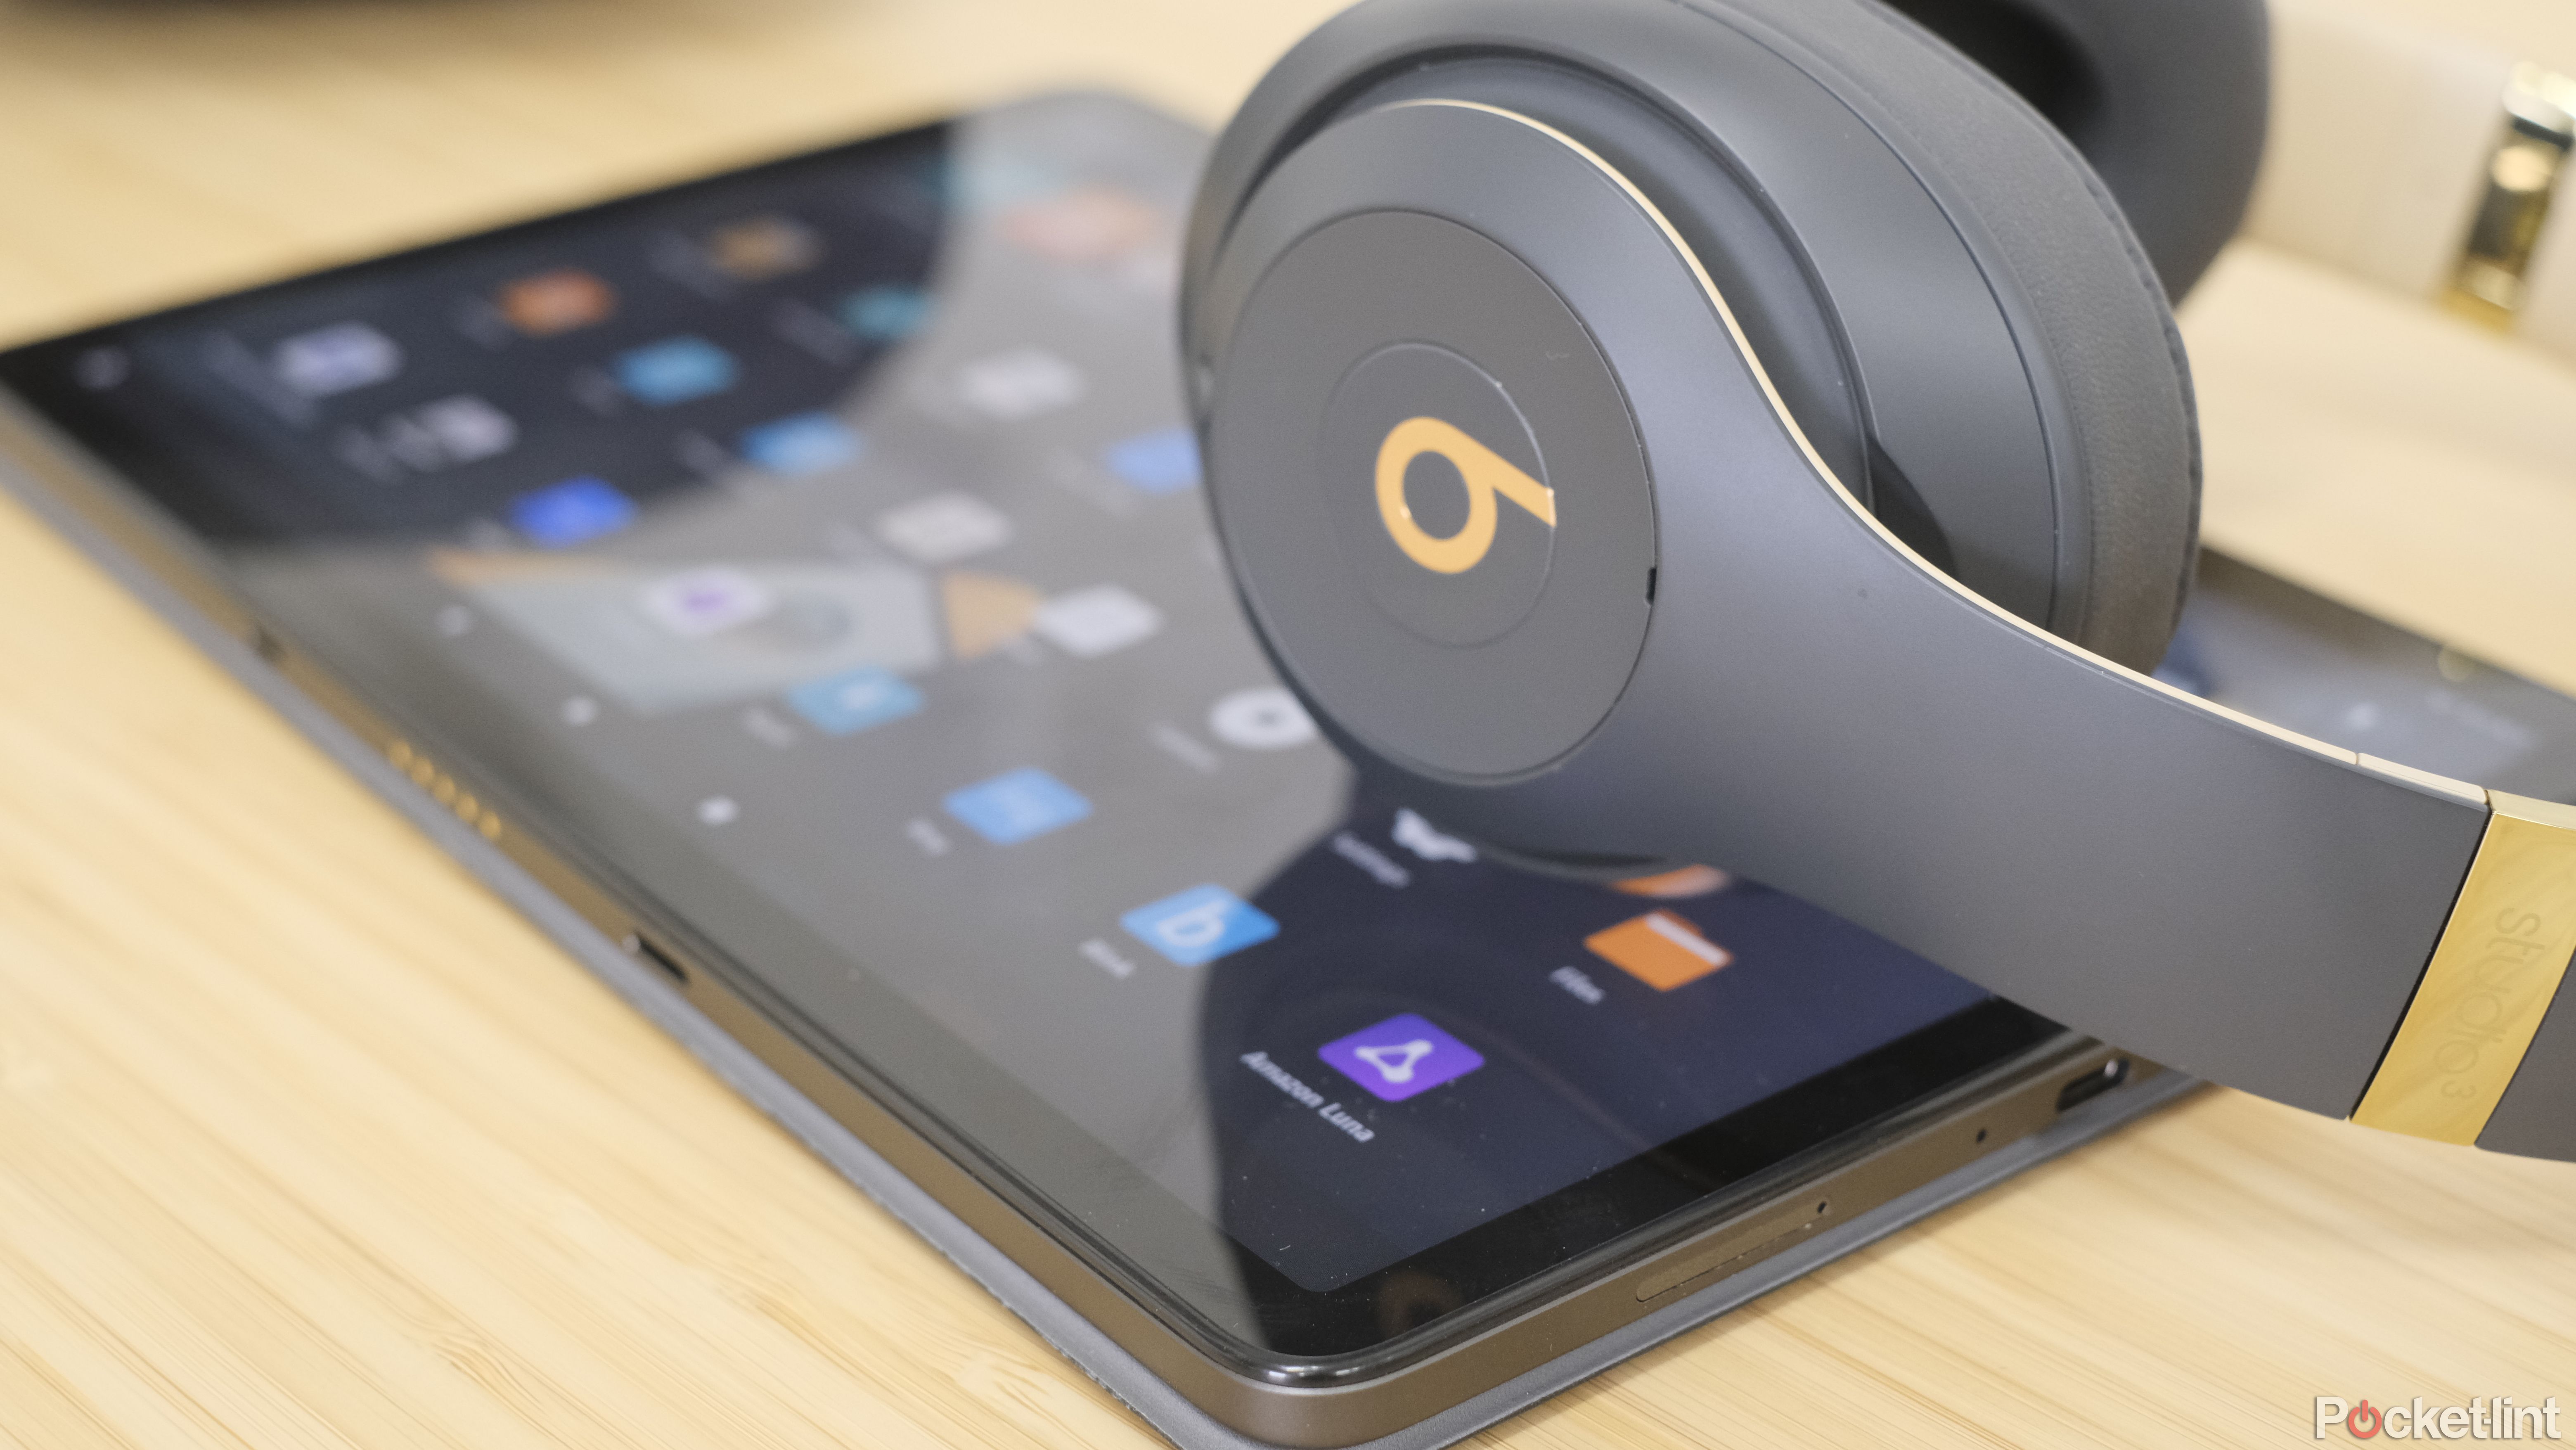 Beats pairing to Fire Tablet